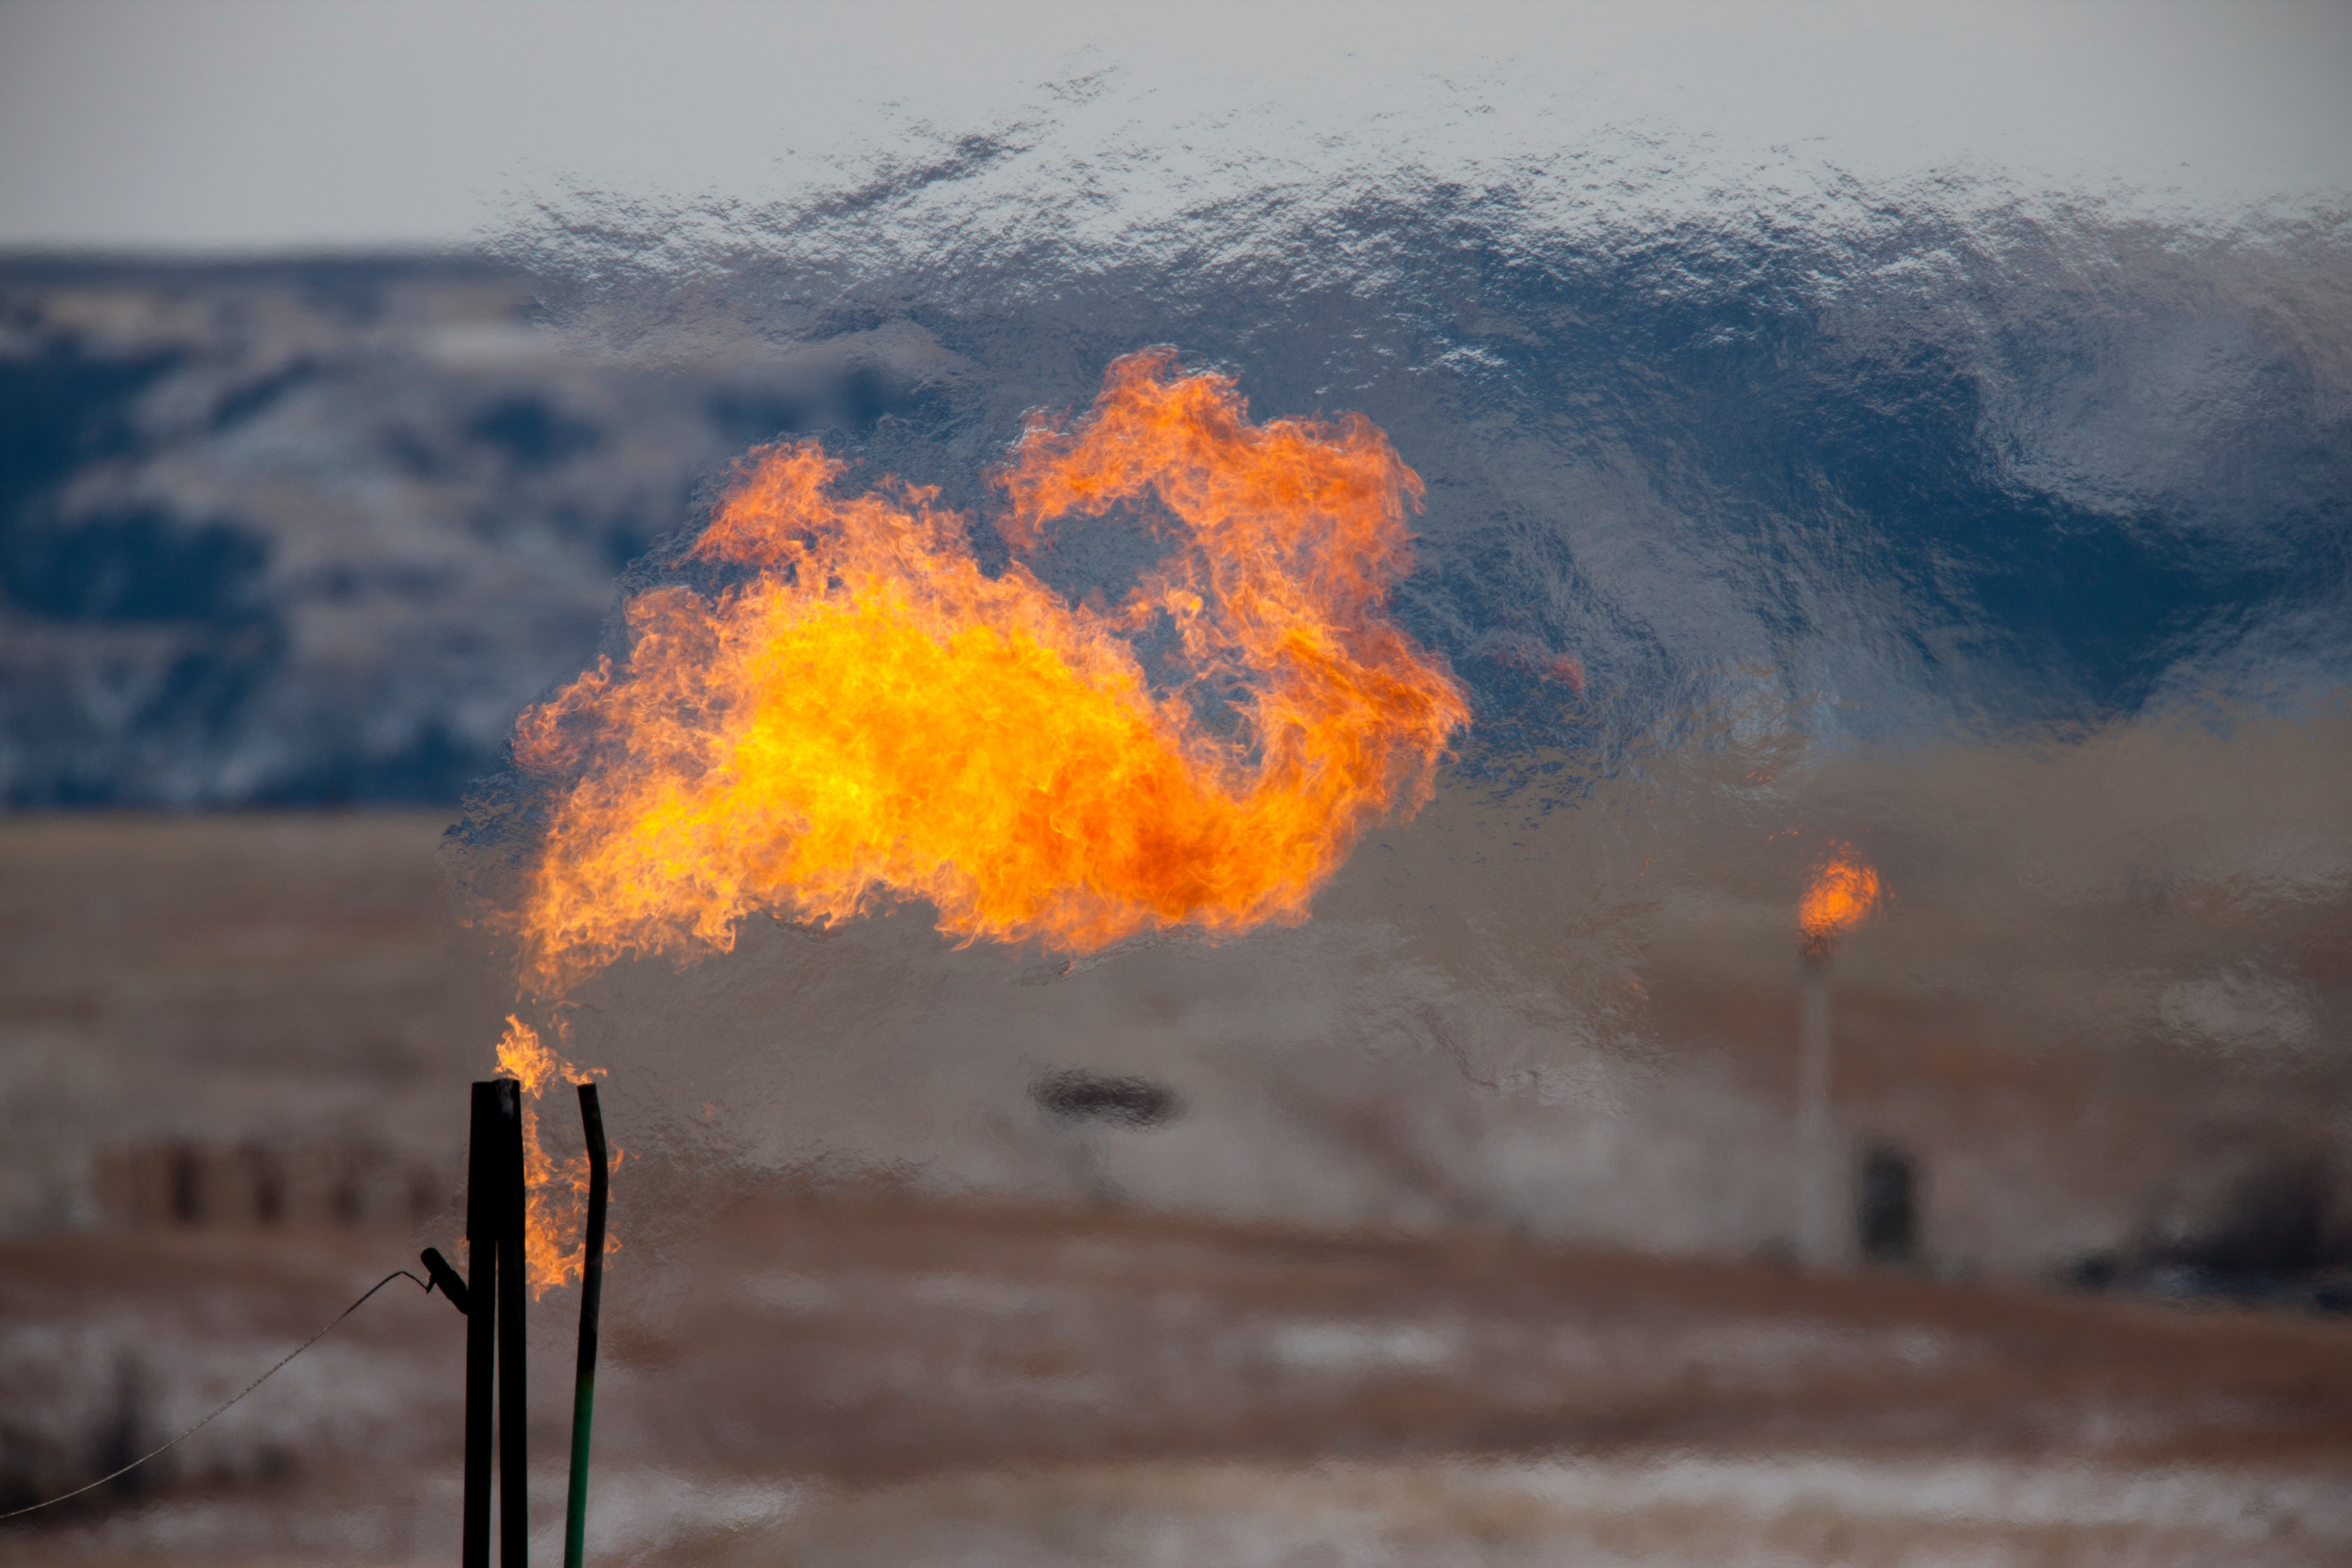 Oil and gas development using 'fracking' technology in the Bakken Oil Fields of Williams and Mountrail Counties in northwestern North Dakota. (Richard Hamilton Smith—Getty Images)